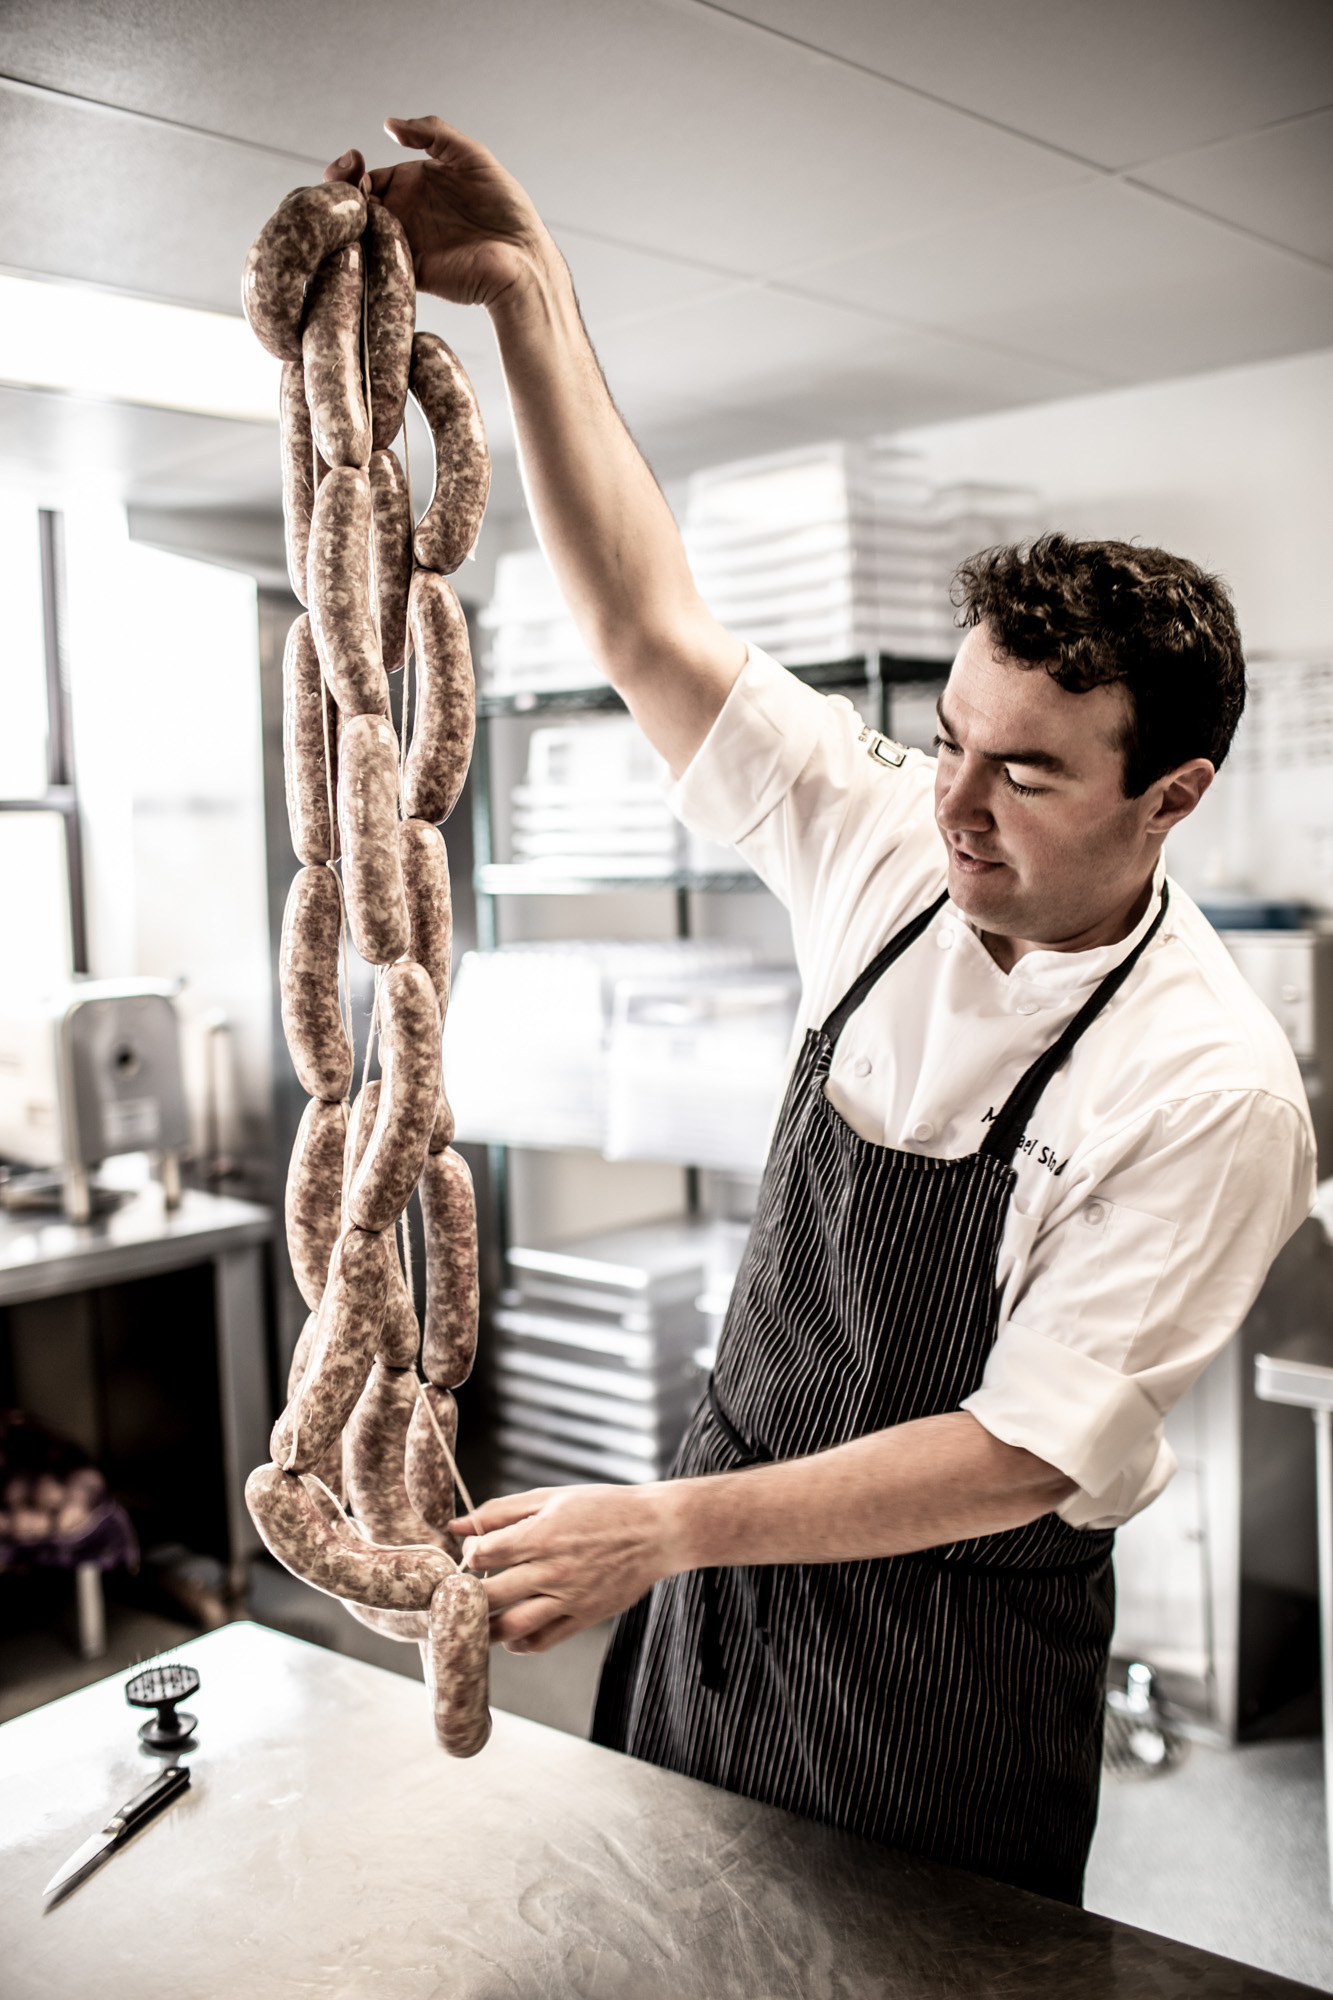 chef holding sausage links in kitchen